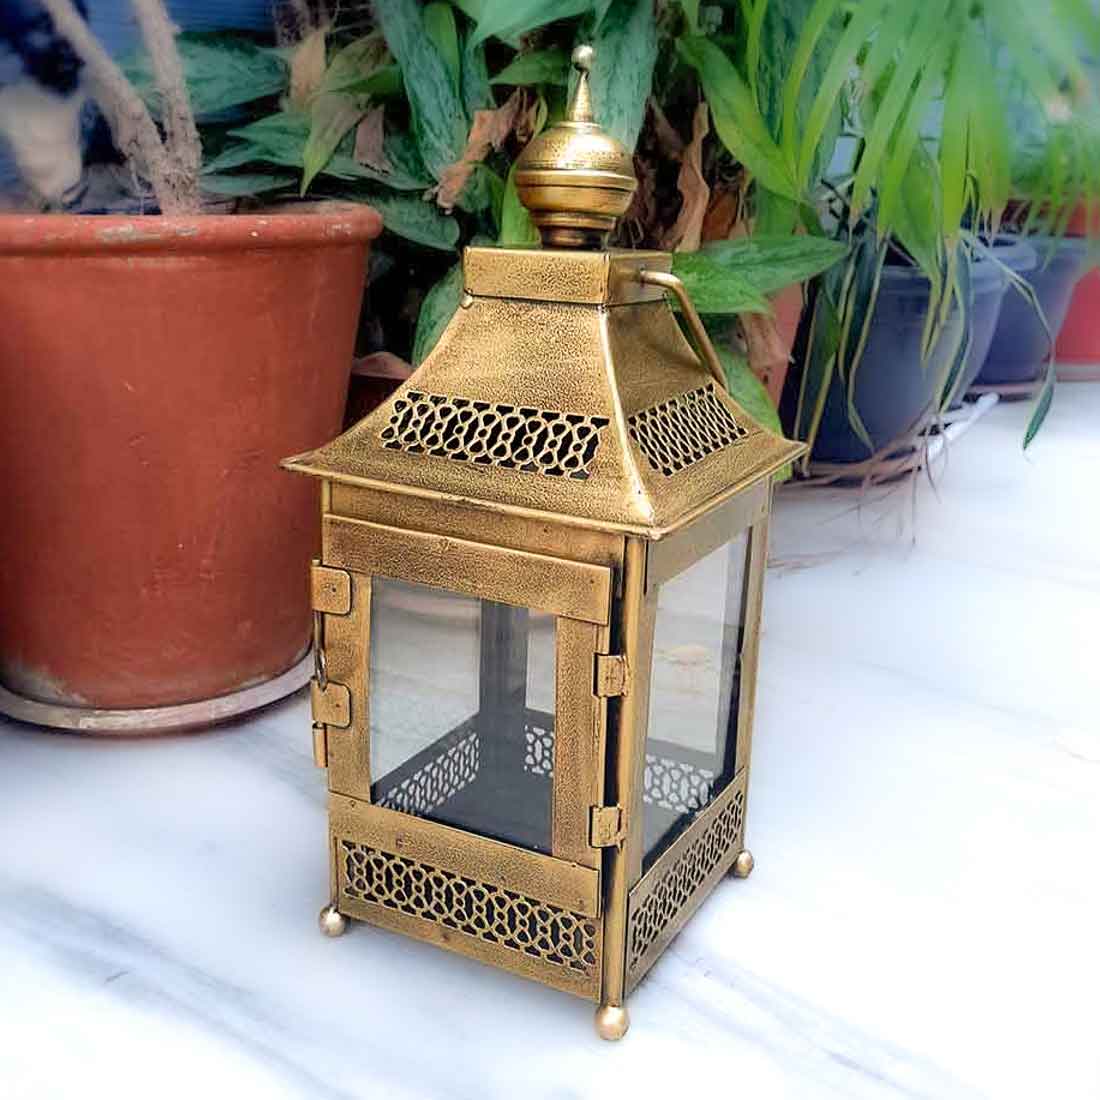 Wall Hanging Lantern | Candle / Tea Light Holder - for Home Decor & Gifts - 16 inch